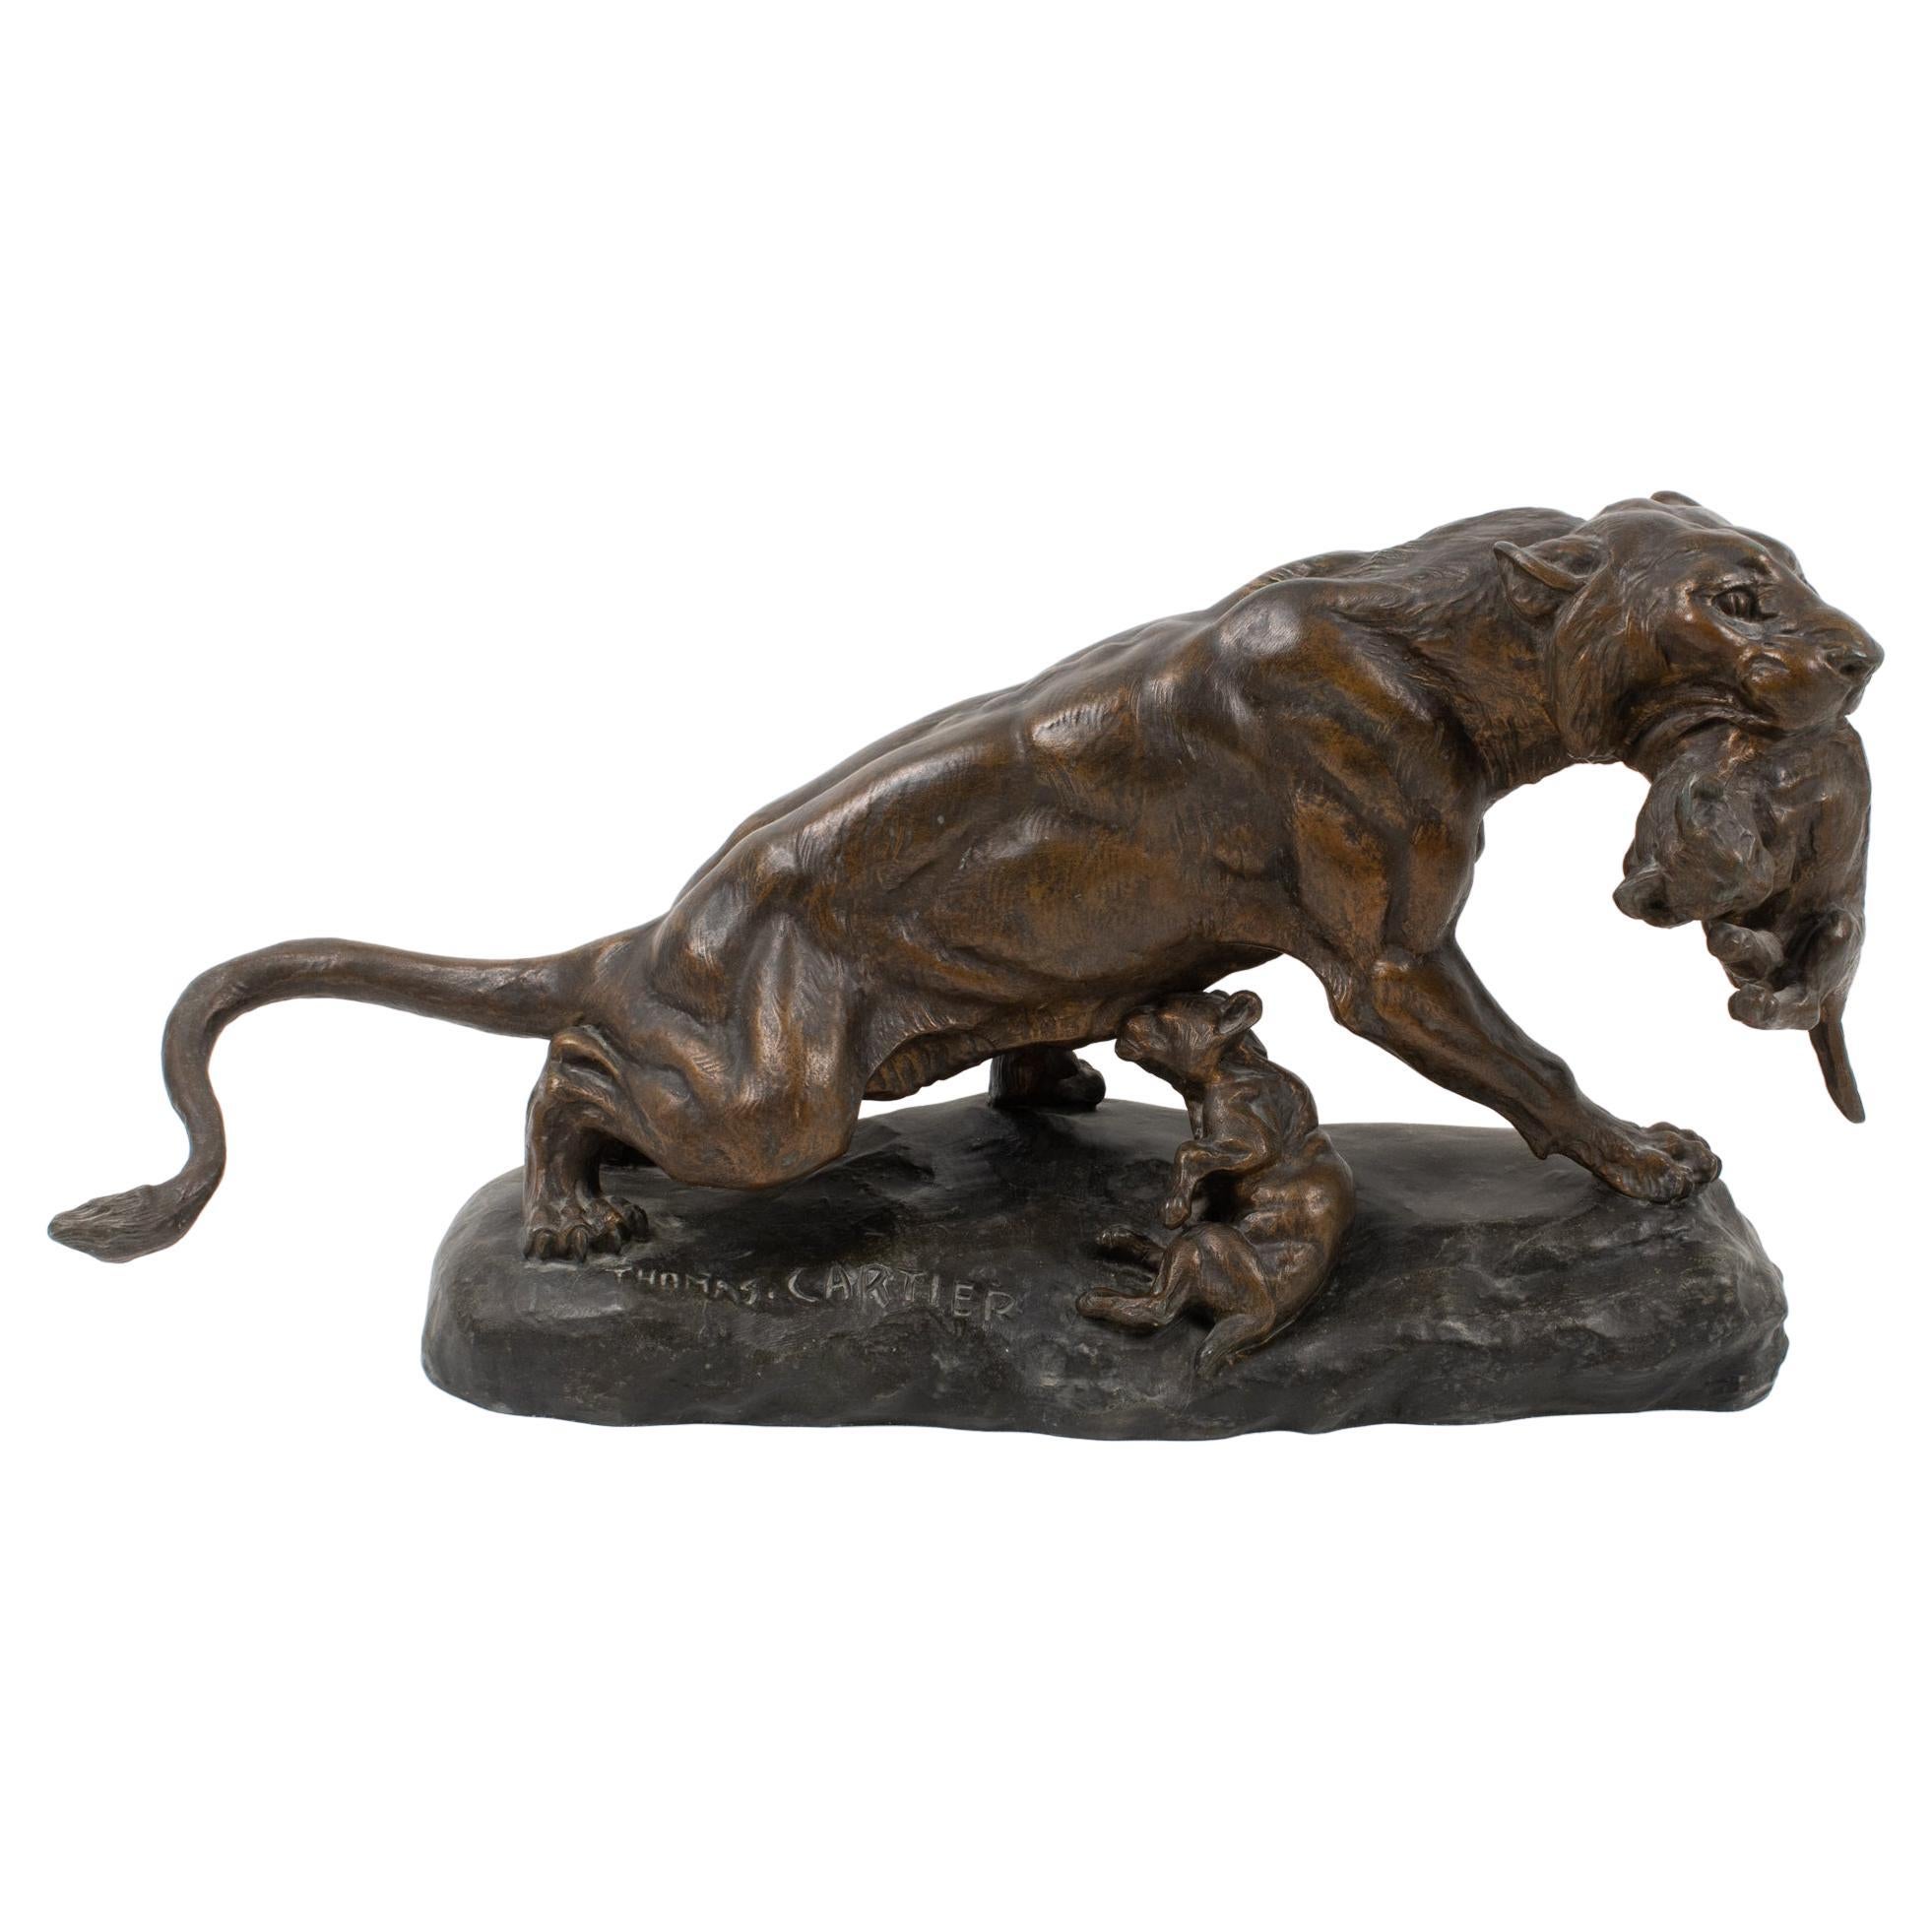 Thomas Cartier Art Deco Bronze-Patinated Spelter Sculpture, Lioness with Cubs